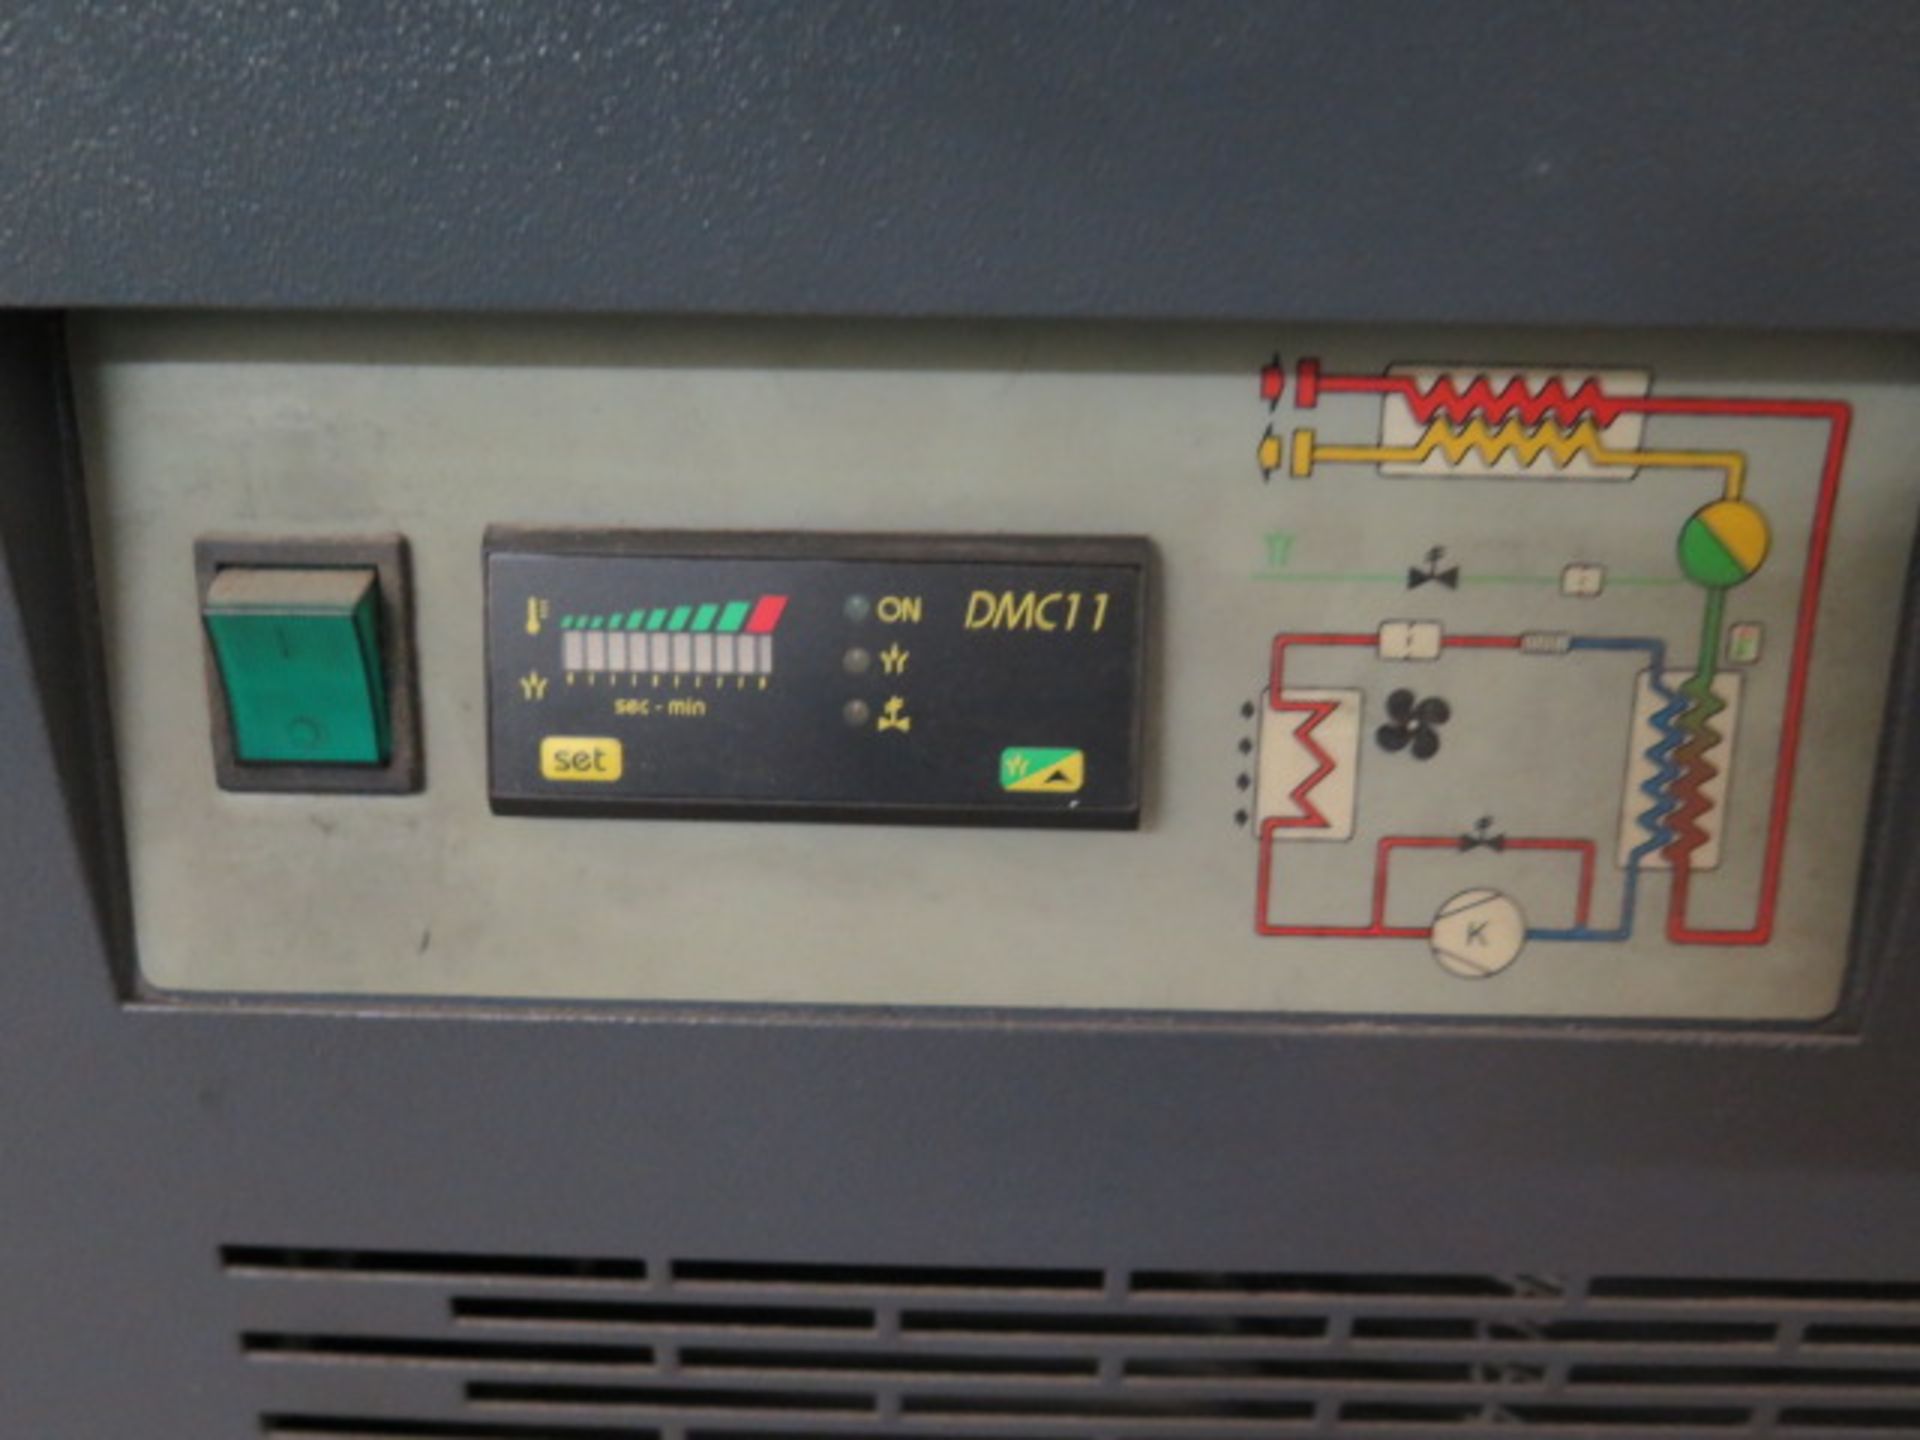 Conaire mdl. CNC160-1 Process Chillwer and Hankison Air Dryer (SOLD AS-IS - NO WARRANTY) - Image 7 of 7